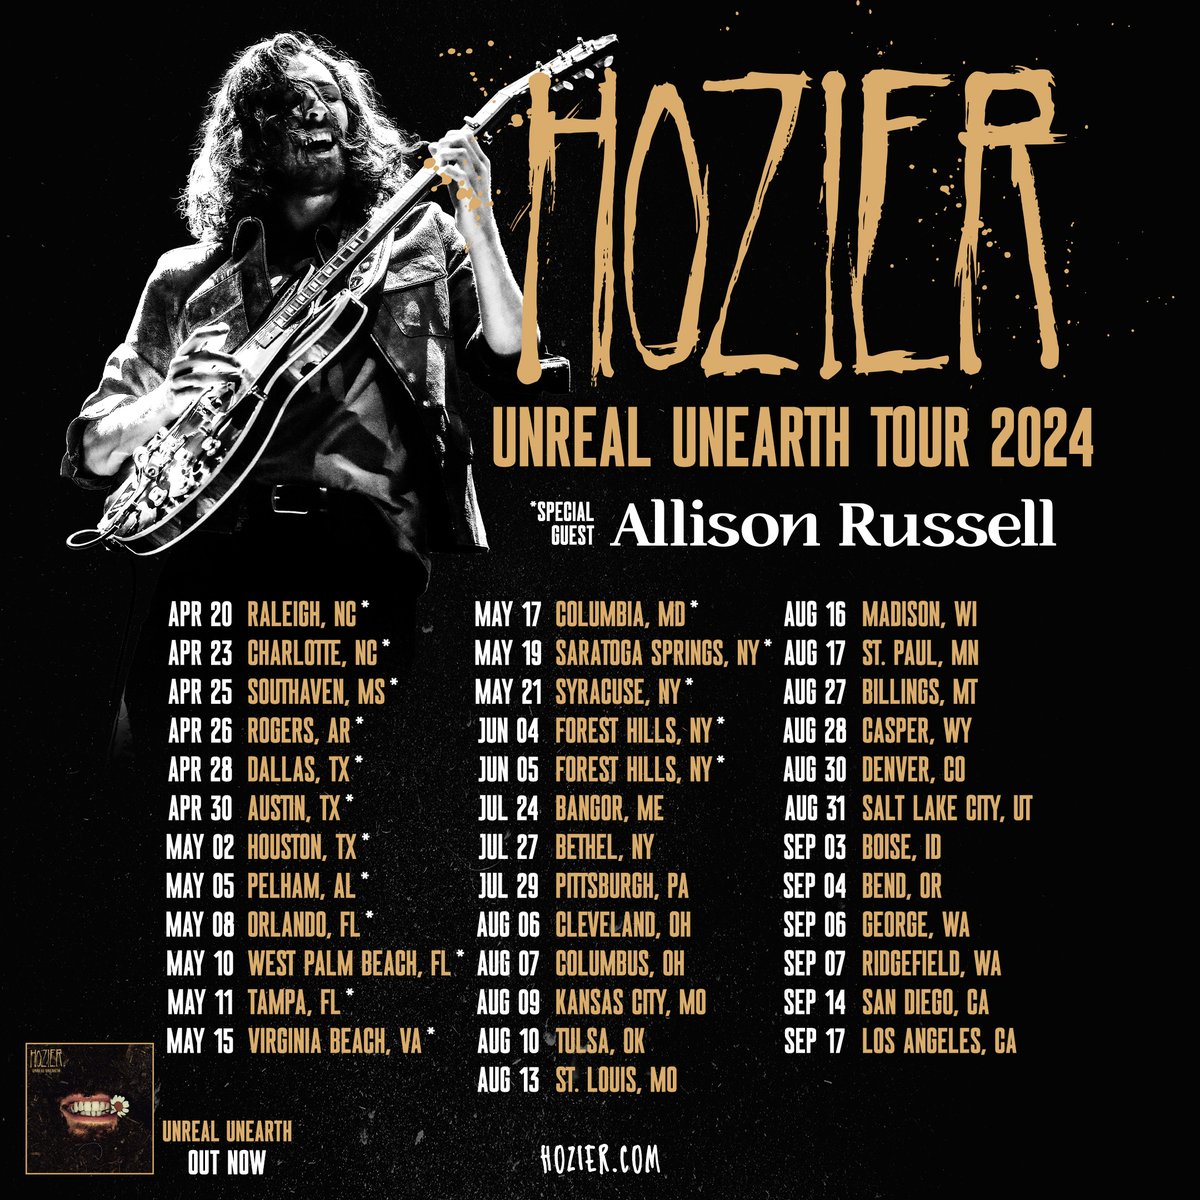 It’s a joy to announce these brand new #UnrealUnearth US tour dates are on sale now.  I hope to see you there! 🖤

🎟️ hozier.com/live